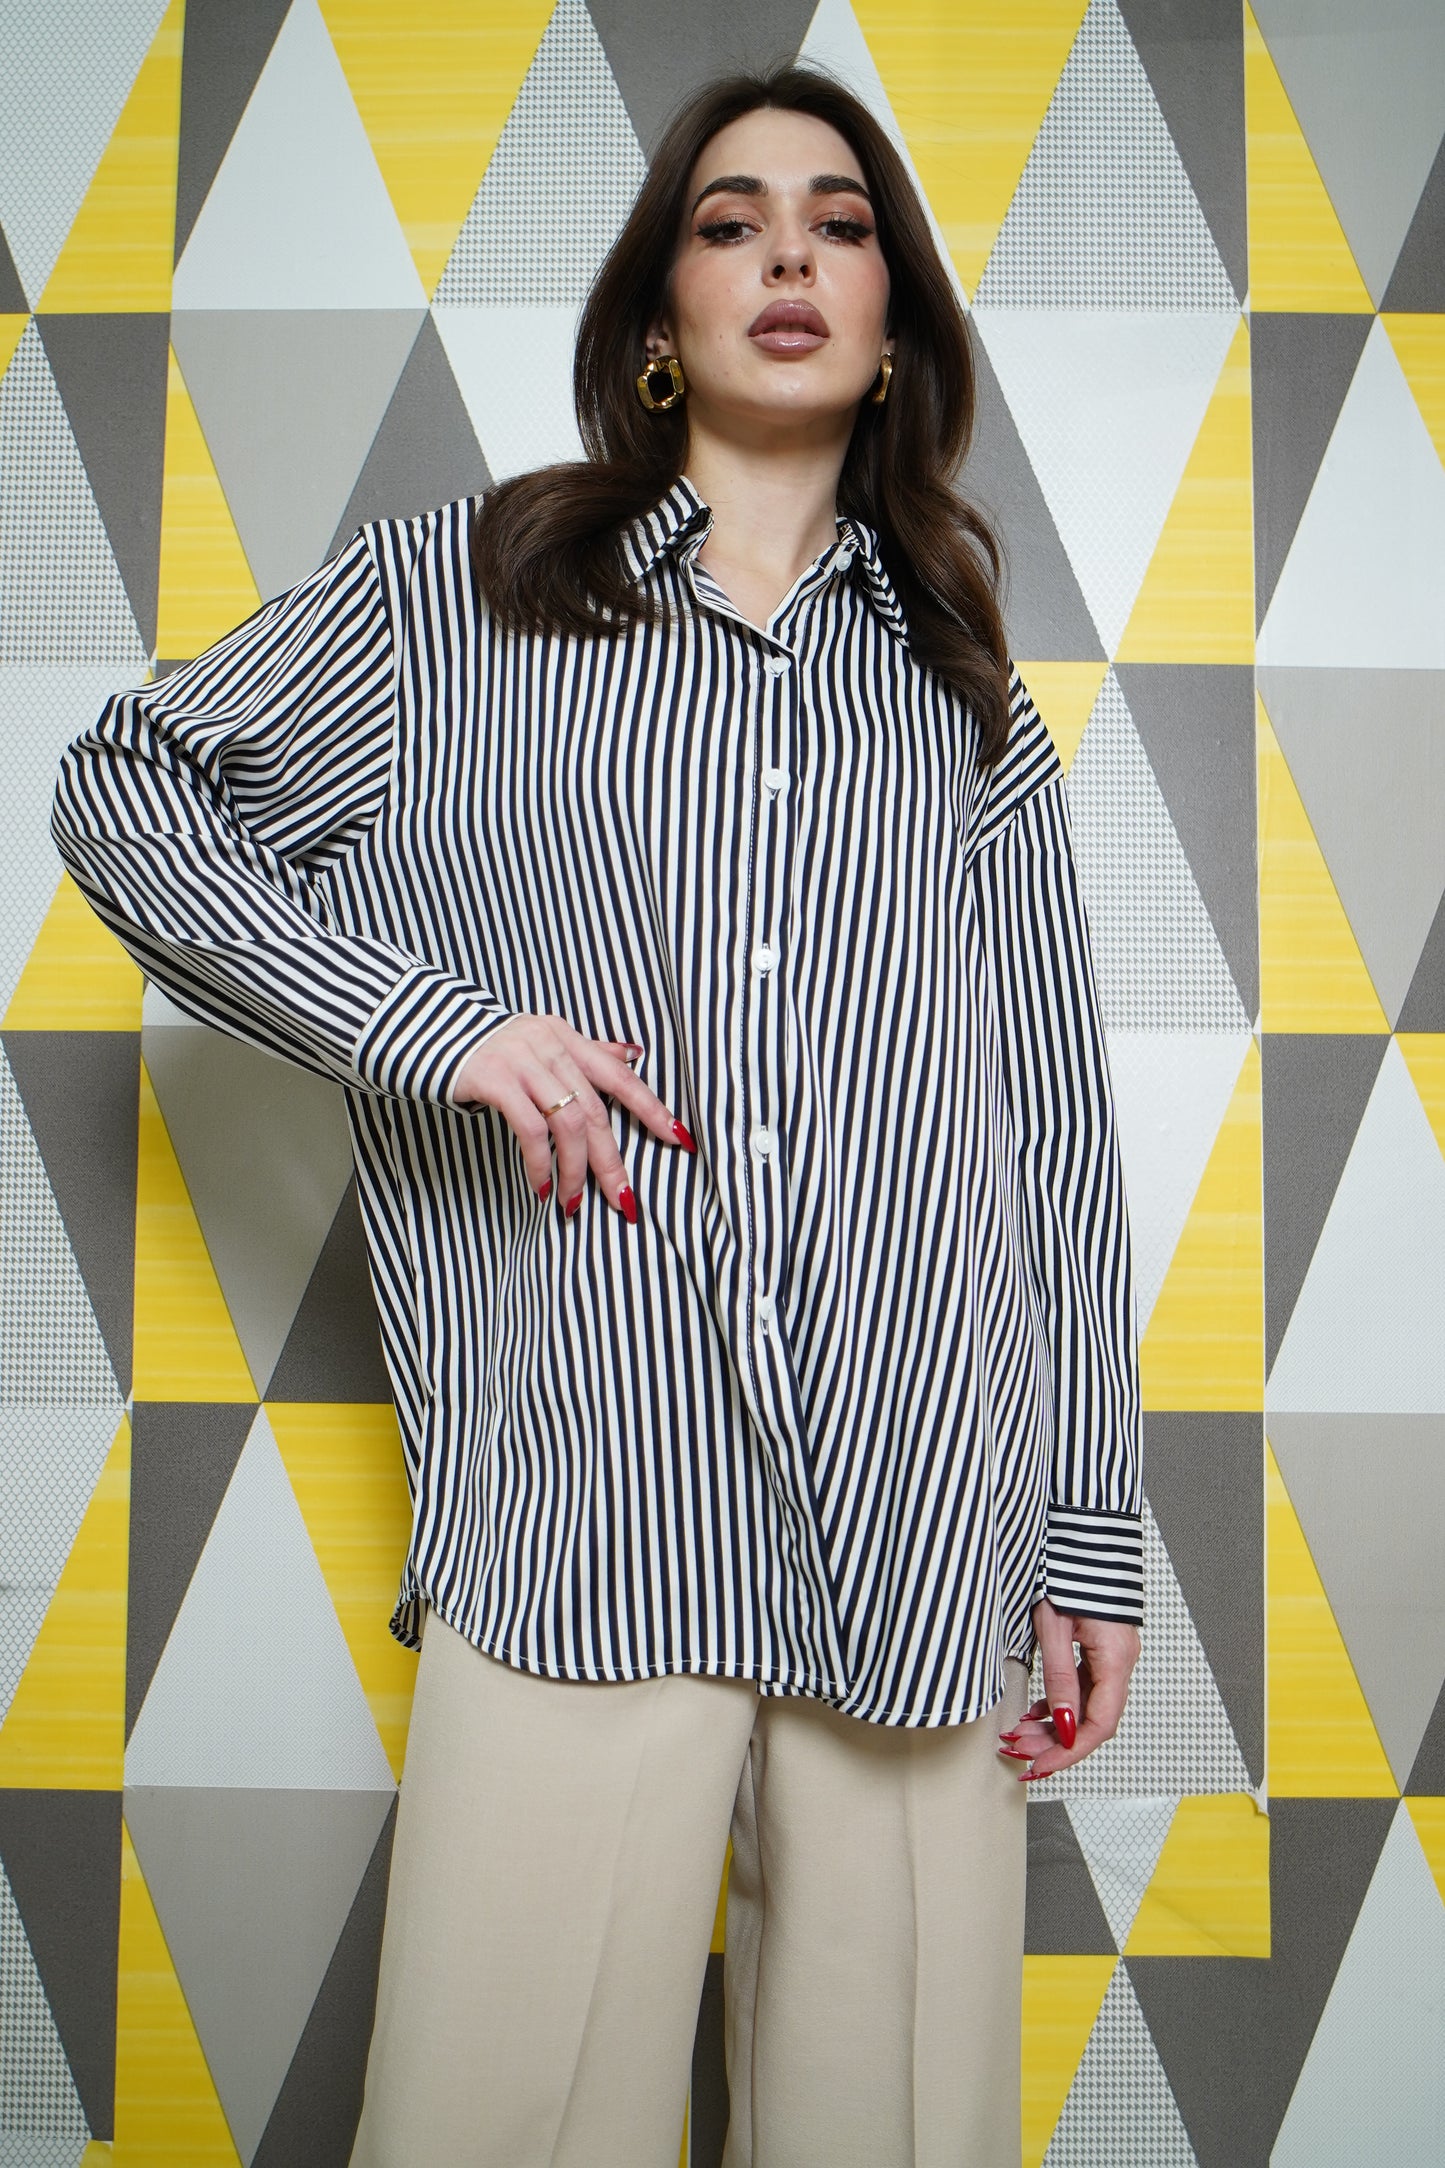 Thick Black Striped Button Down Corporate Shirt